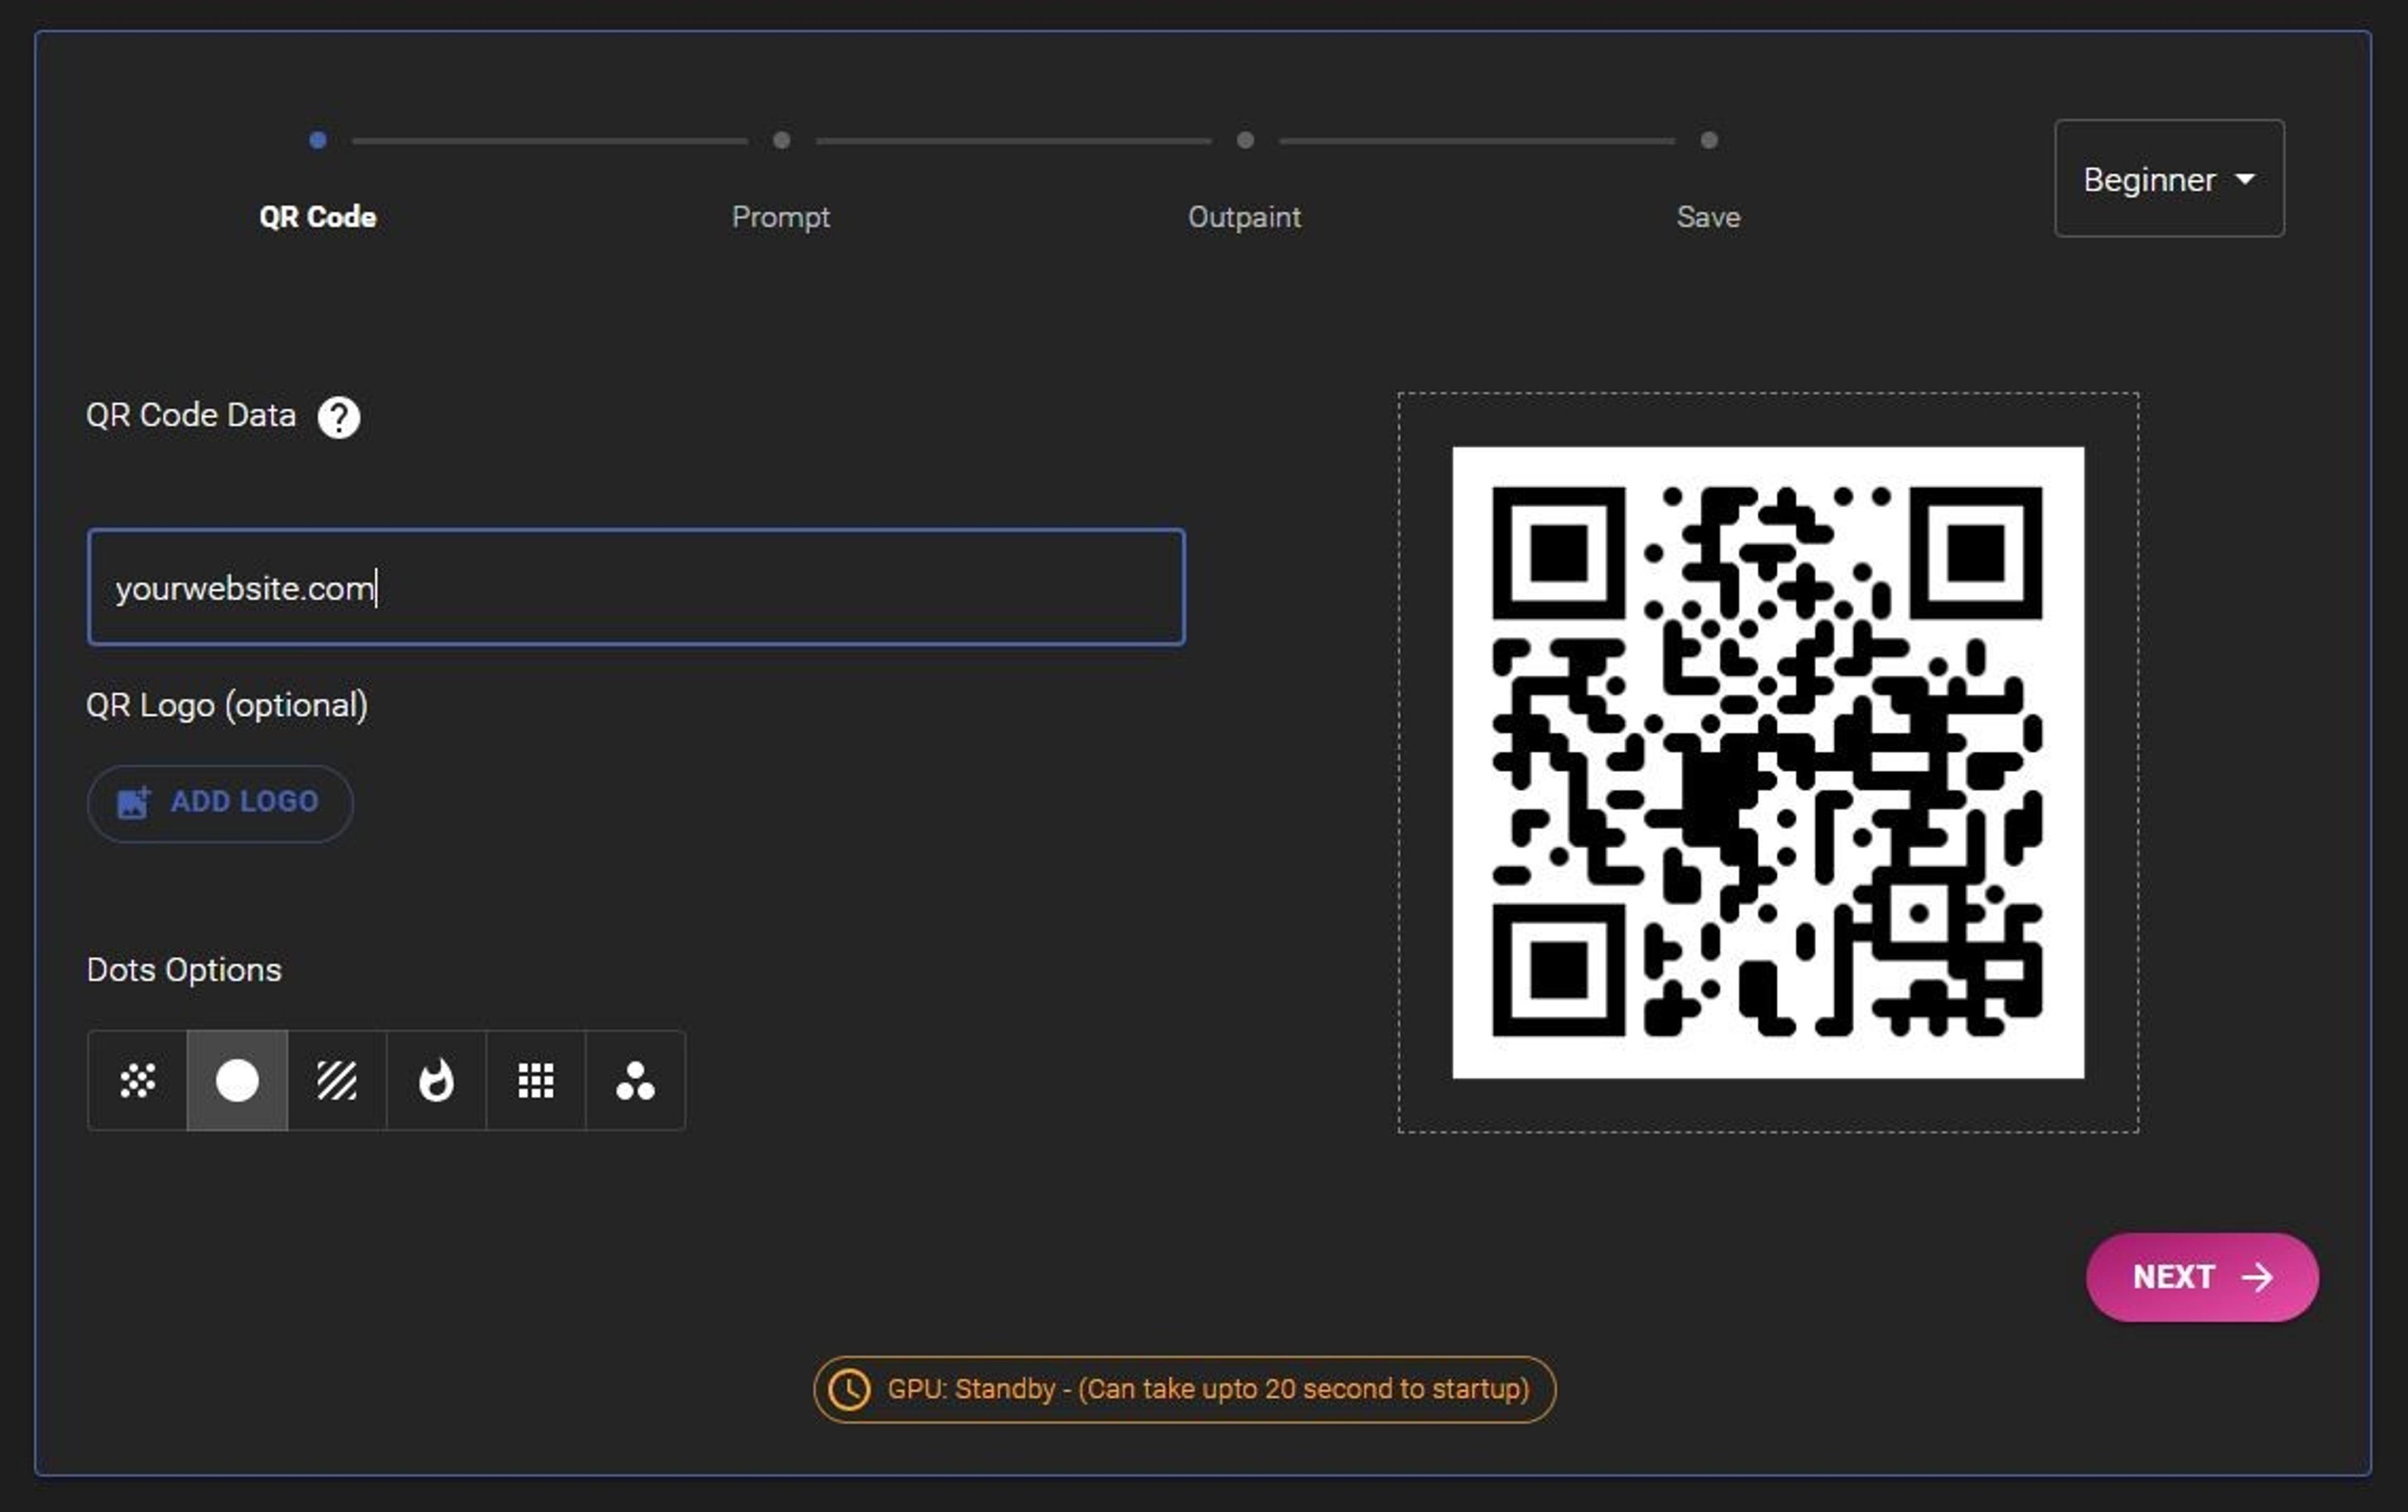 Image that shows where to enter the QR Code data